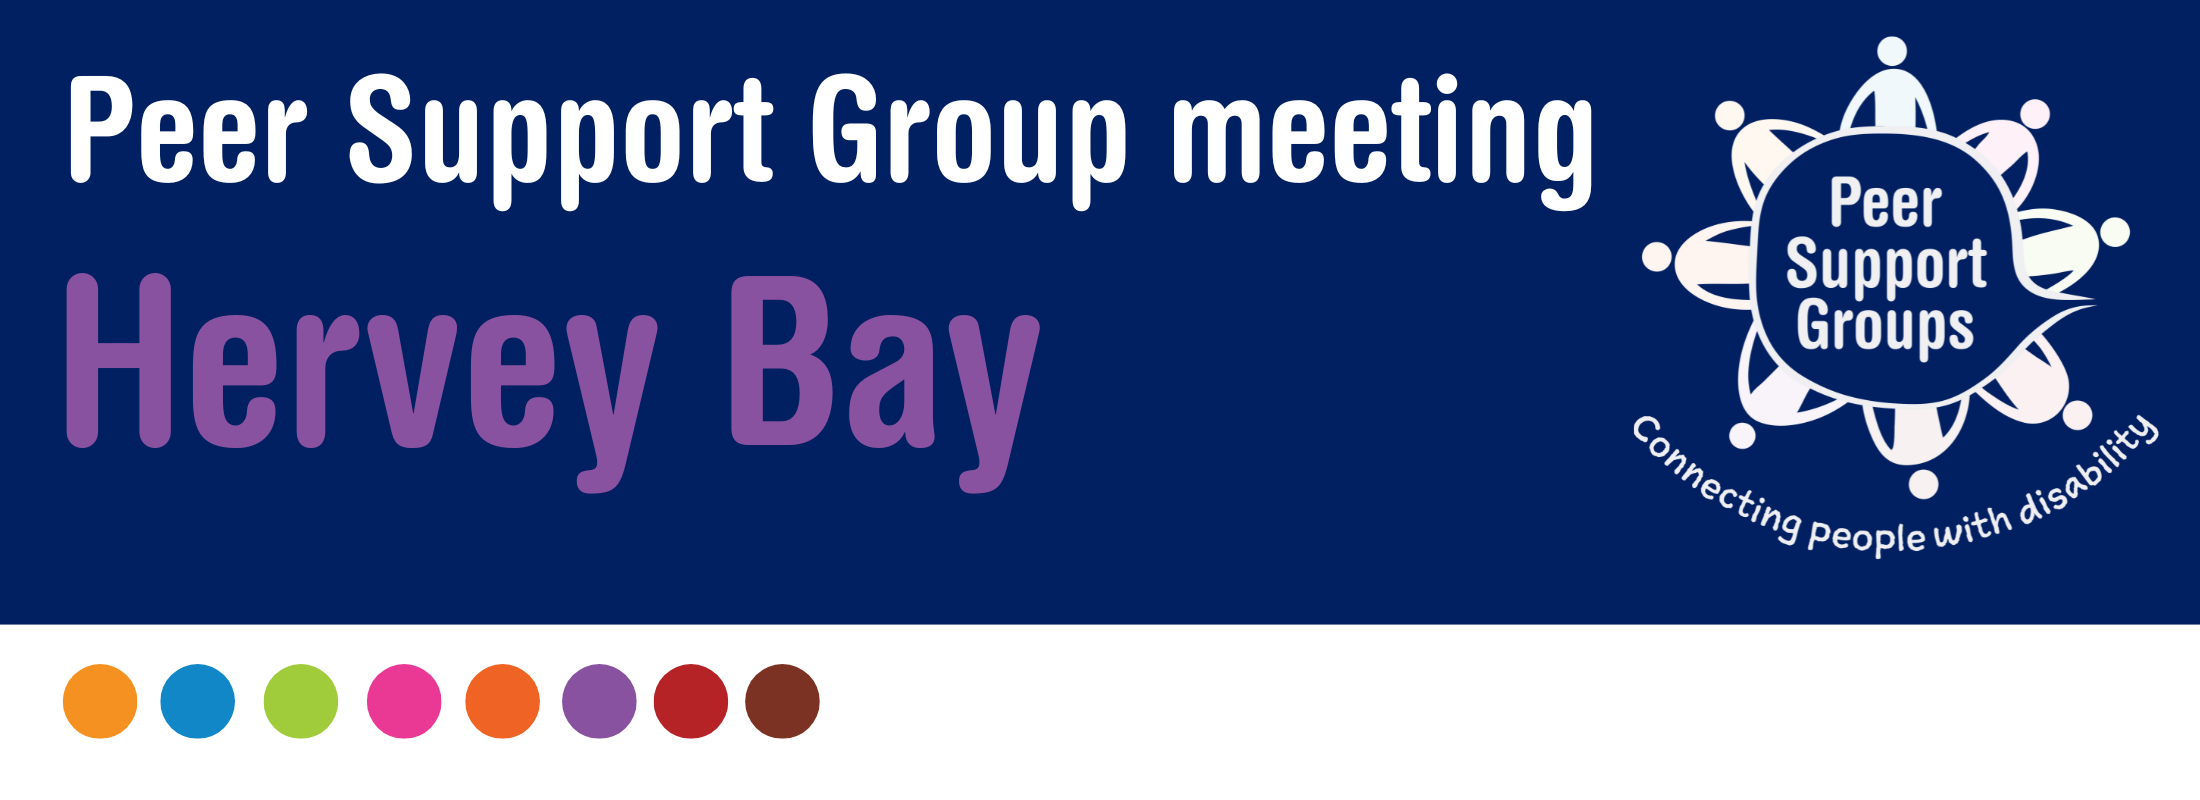 The image shows an event banner with blue and white background. Text says, Peer Support Group meeting Hervey Bay. Peer Support Groups logo at the right side.